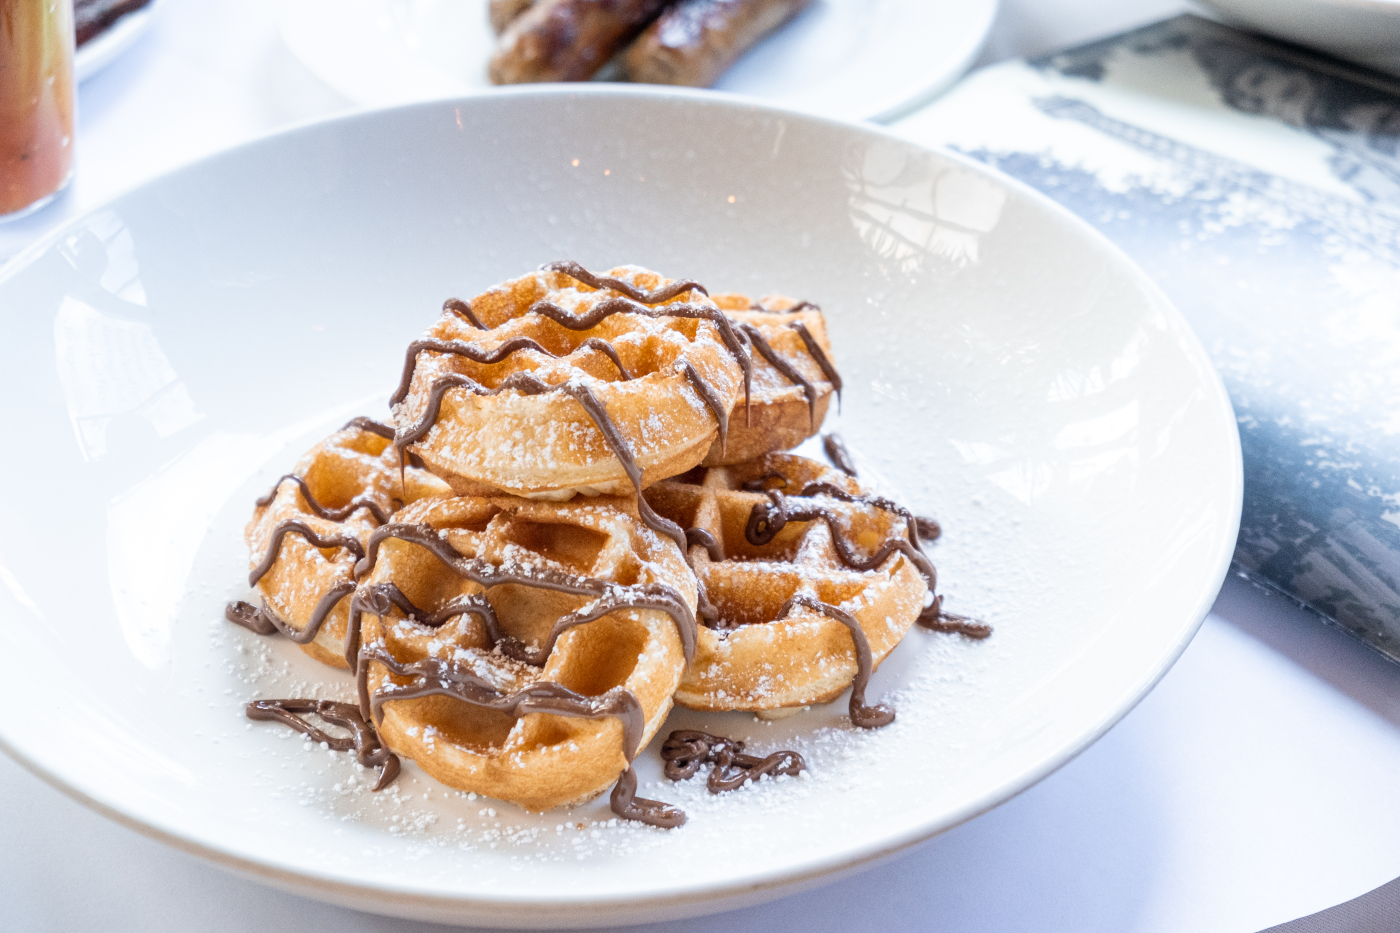 Mon Ami Gabi's Waffles with Hazelnut Nutella available during Weekend Brunch